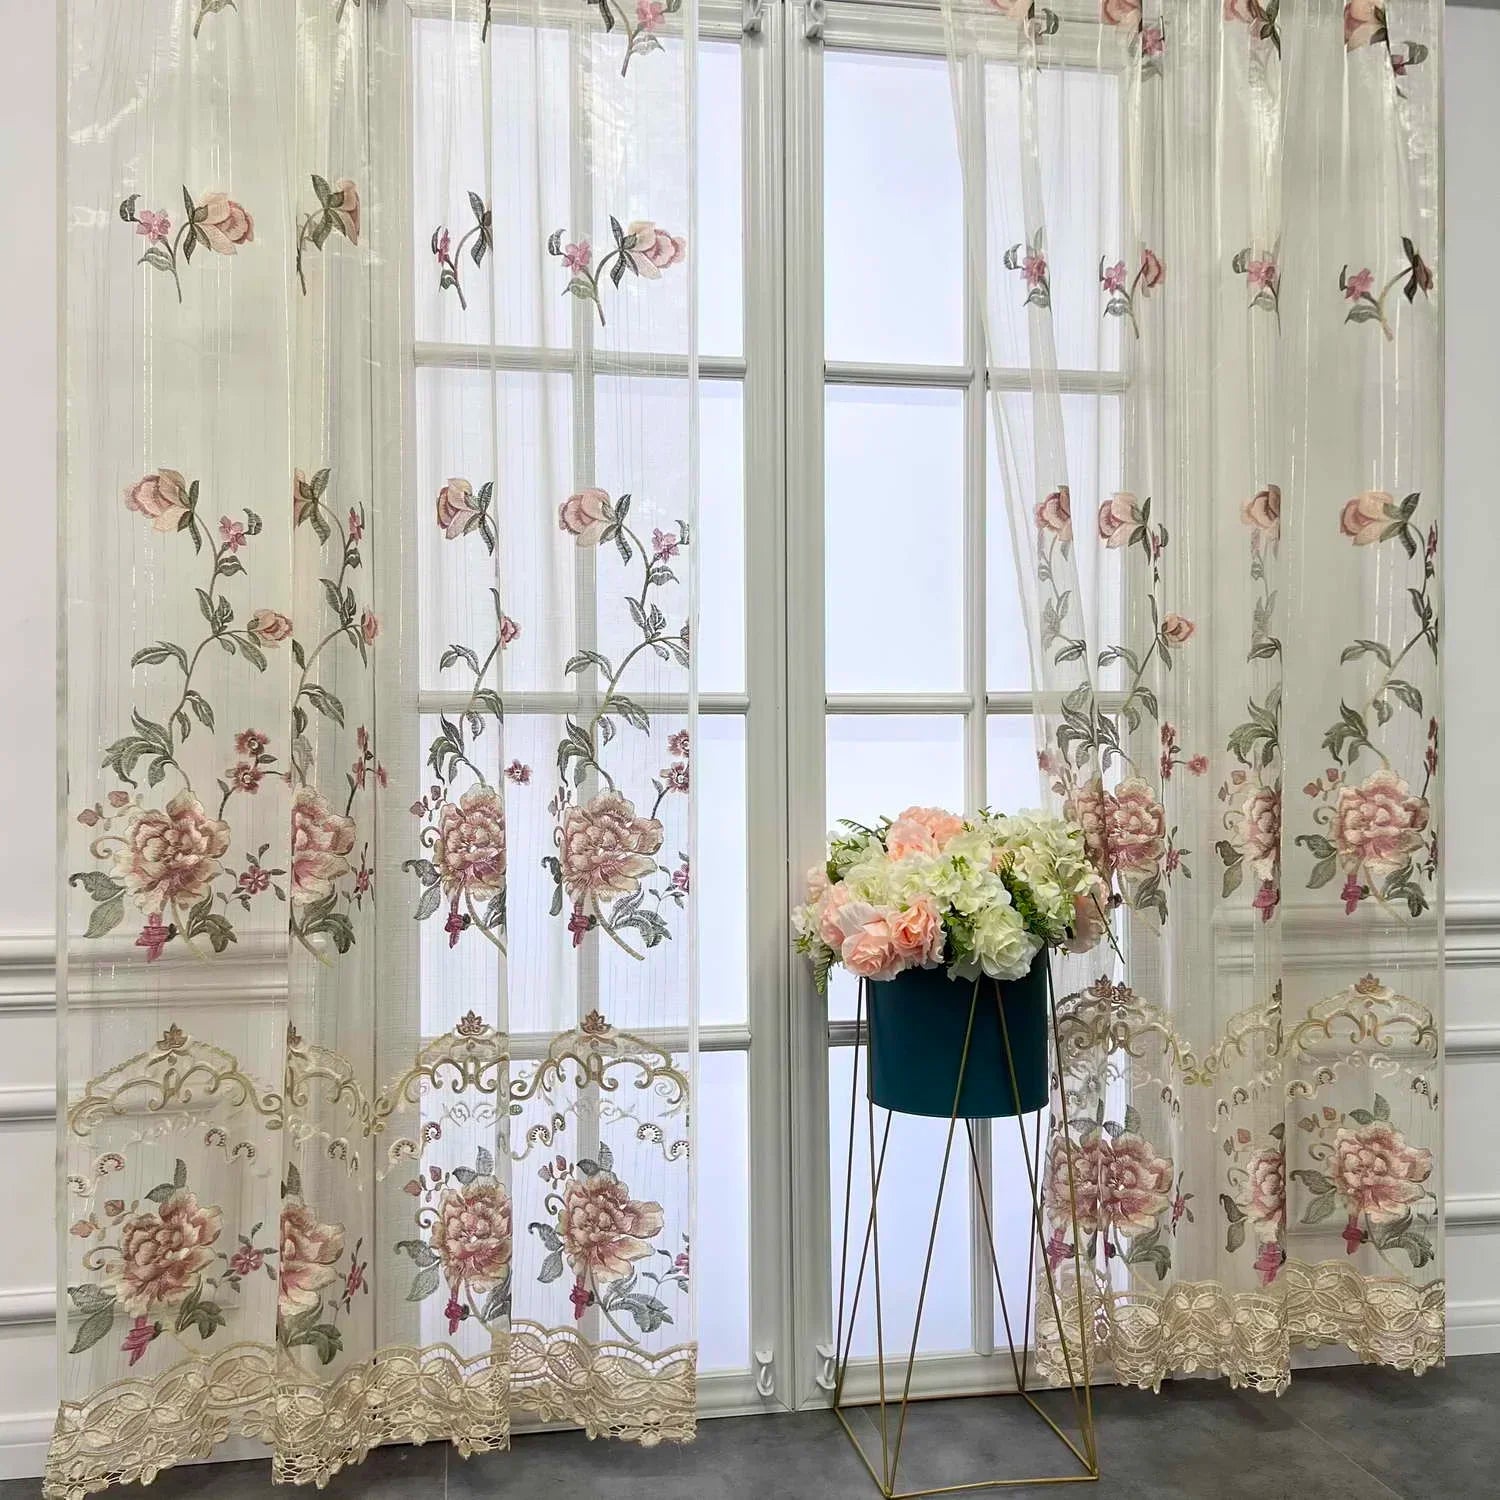 Rustic European Luxury Shiny Gold Thread Embroidery Floral Sheer Curtains for LivingRoom Bedroom Window Treatment Rod Pocket Top